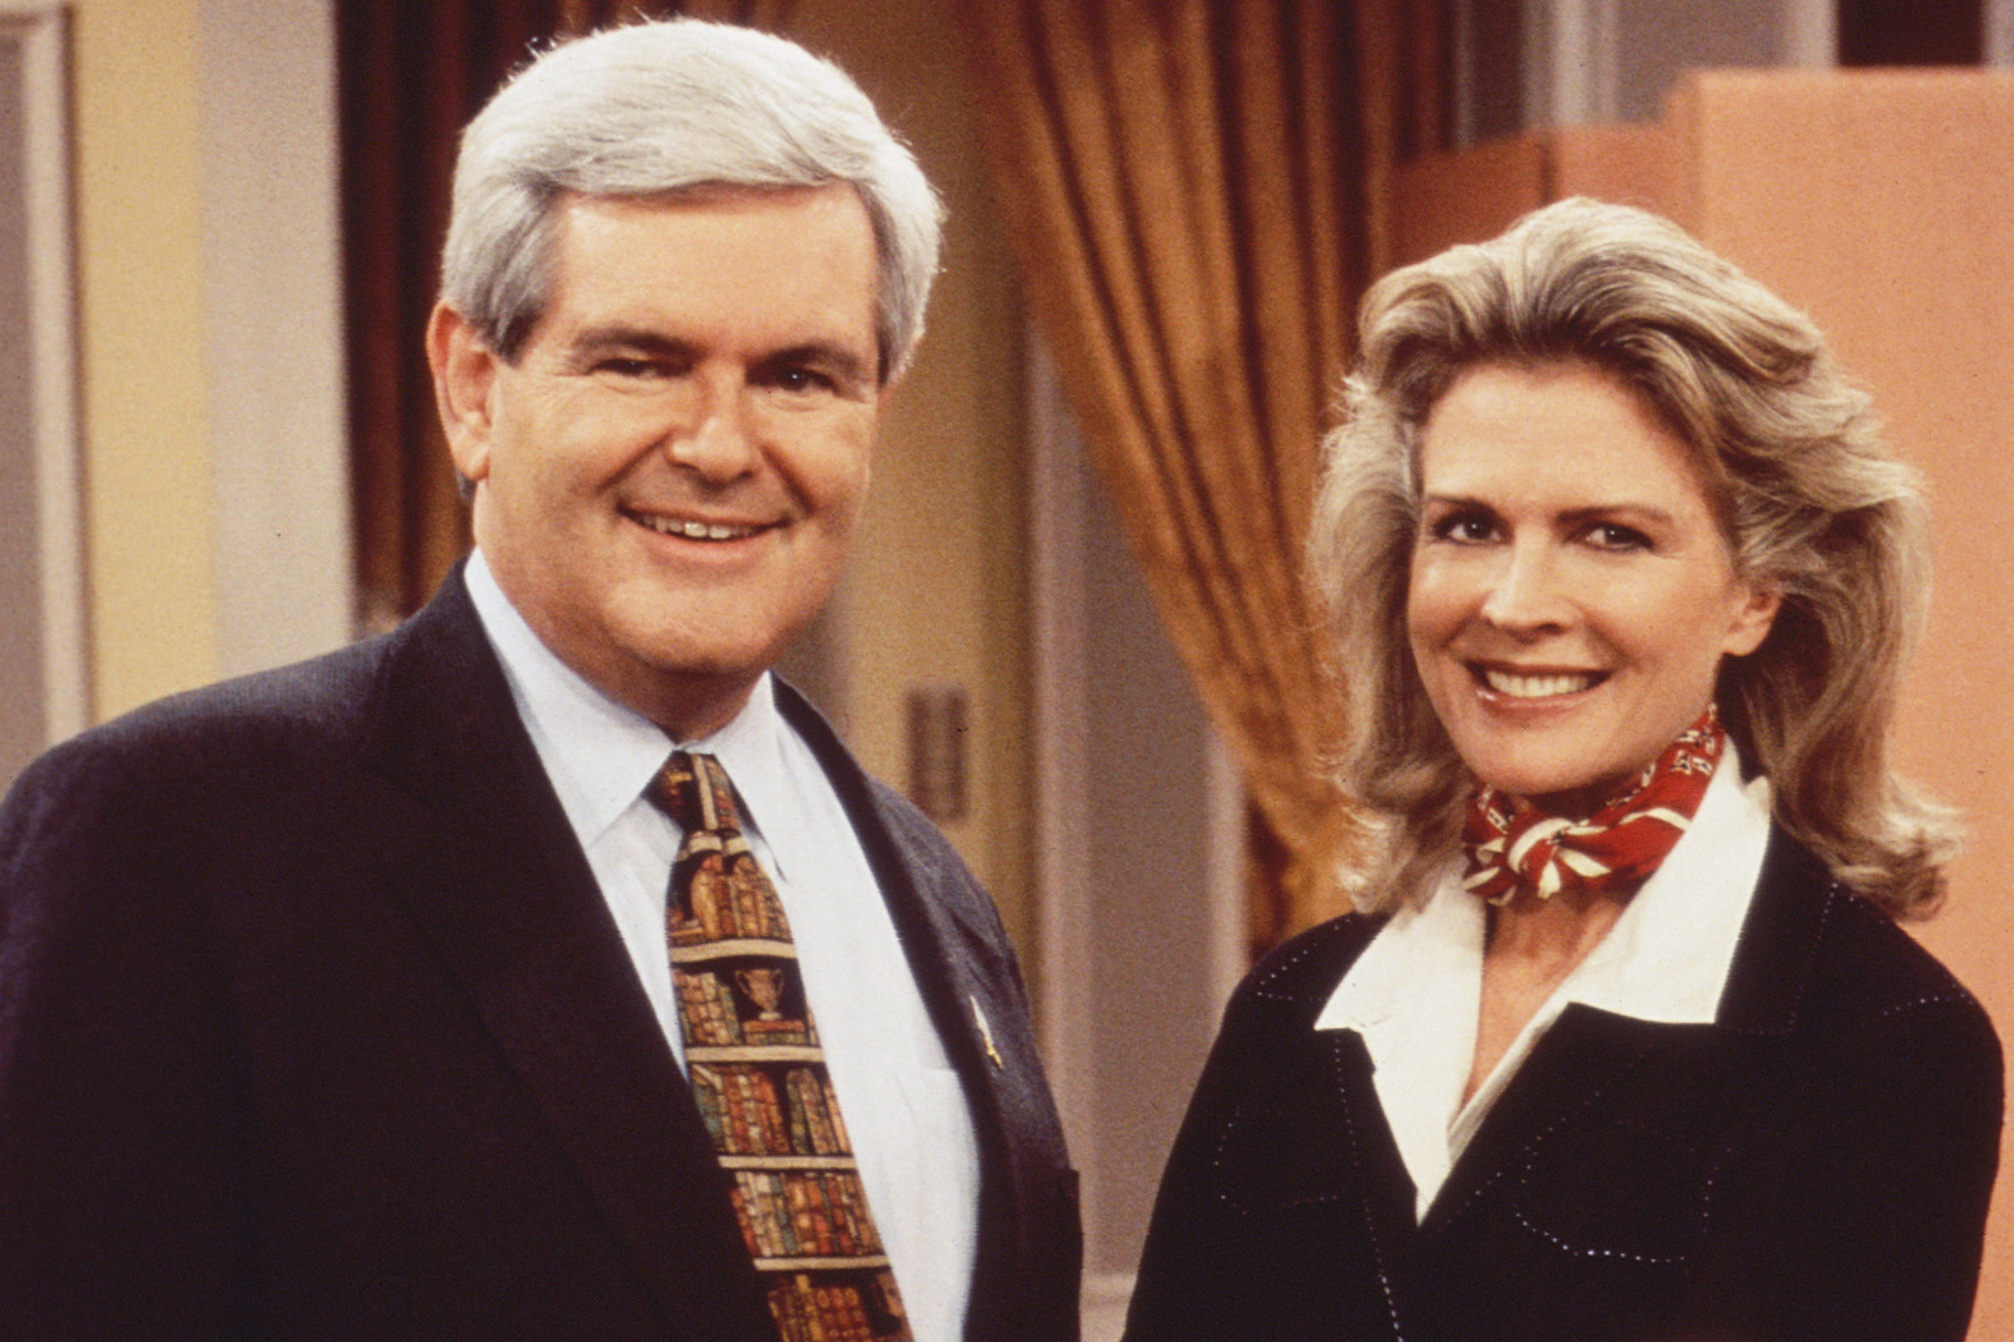 Newt Gingrich and Candice Bergen on Murphy Brown, 1996.